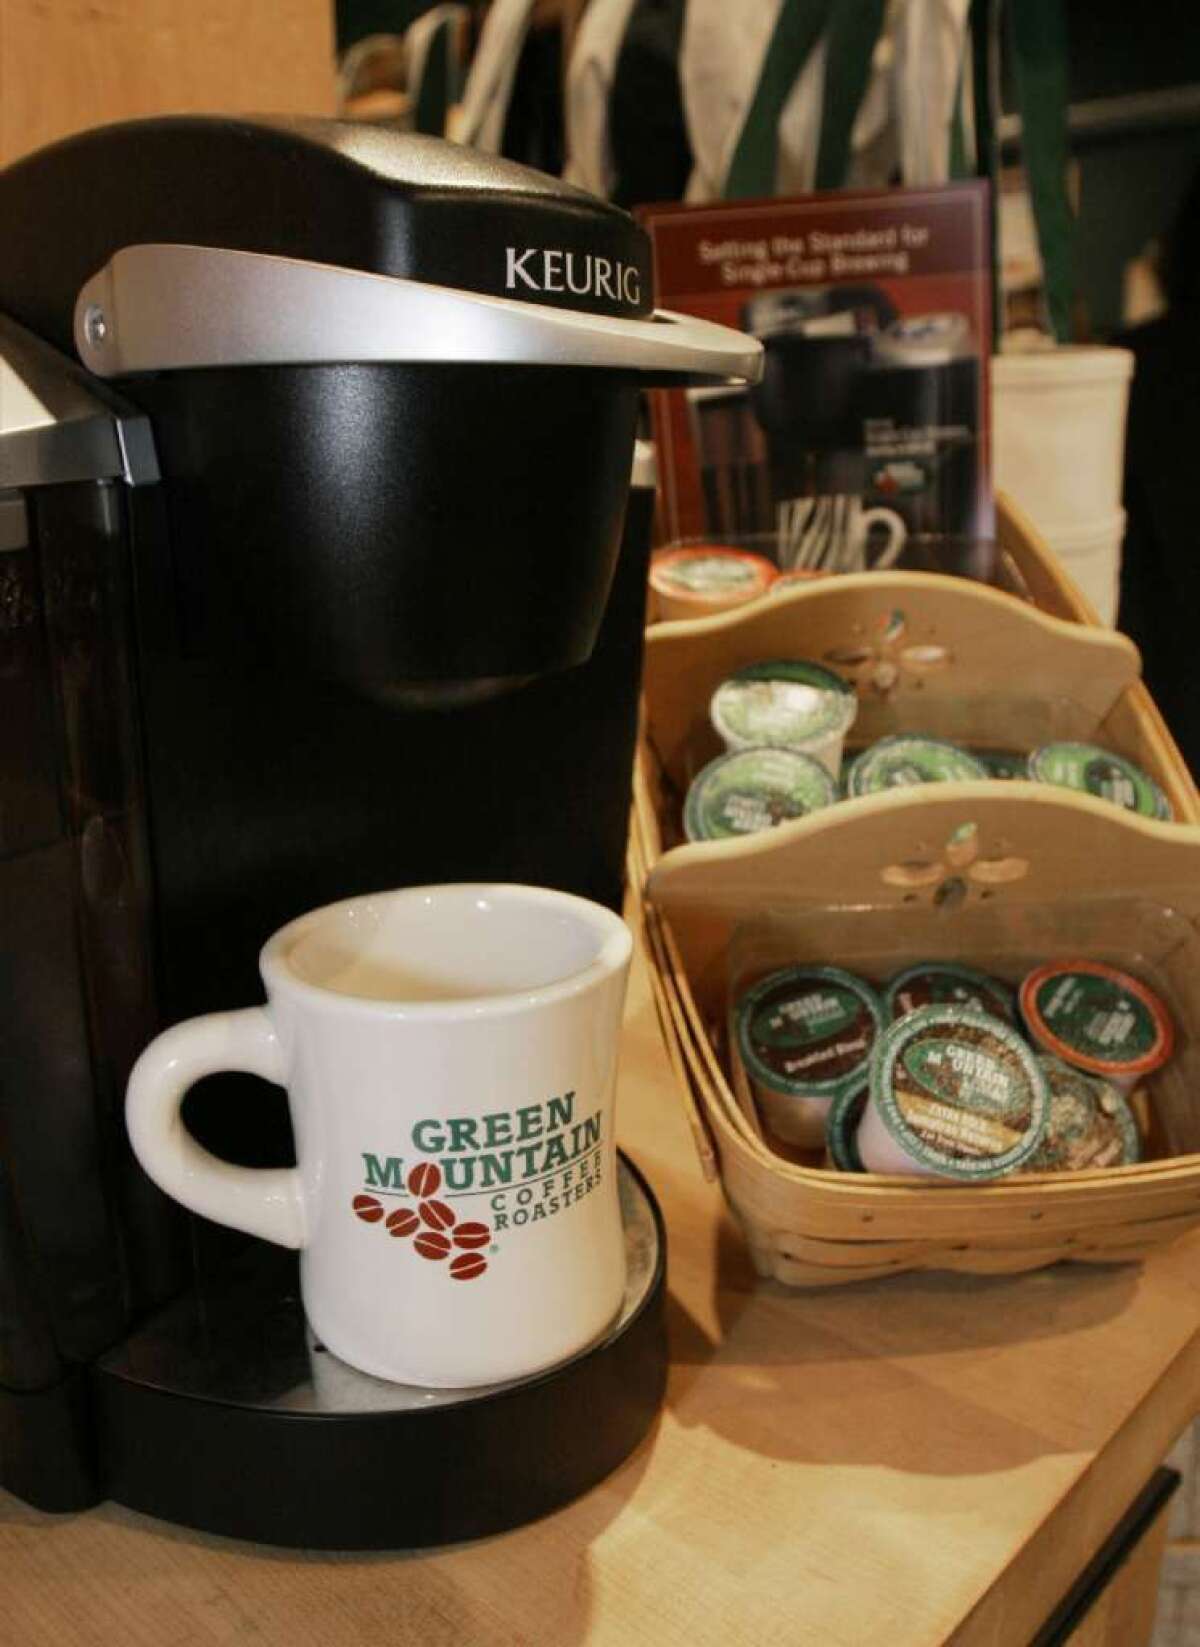 Desperate to keep its franchise: A Keurig Green Mountain brewing machine and pods.